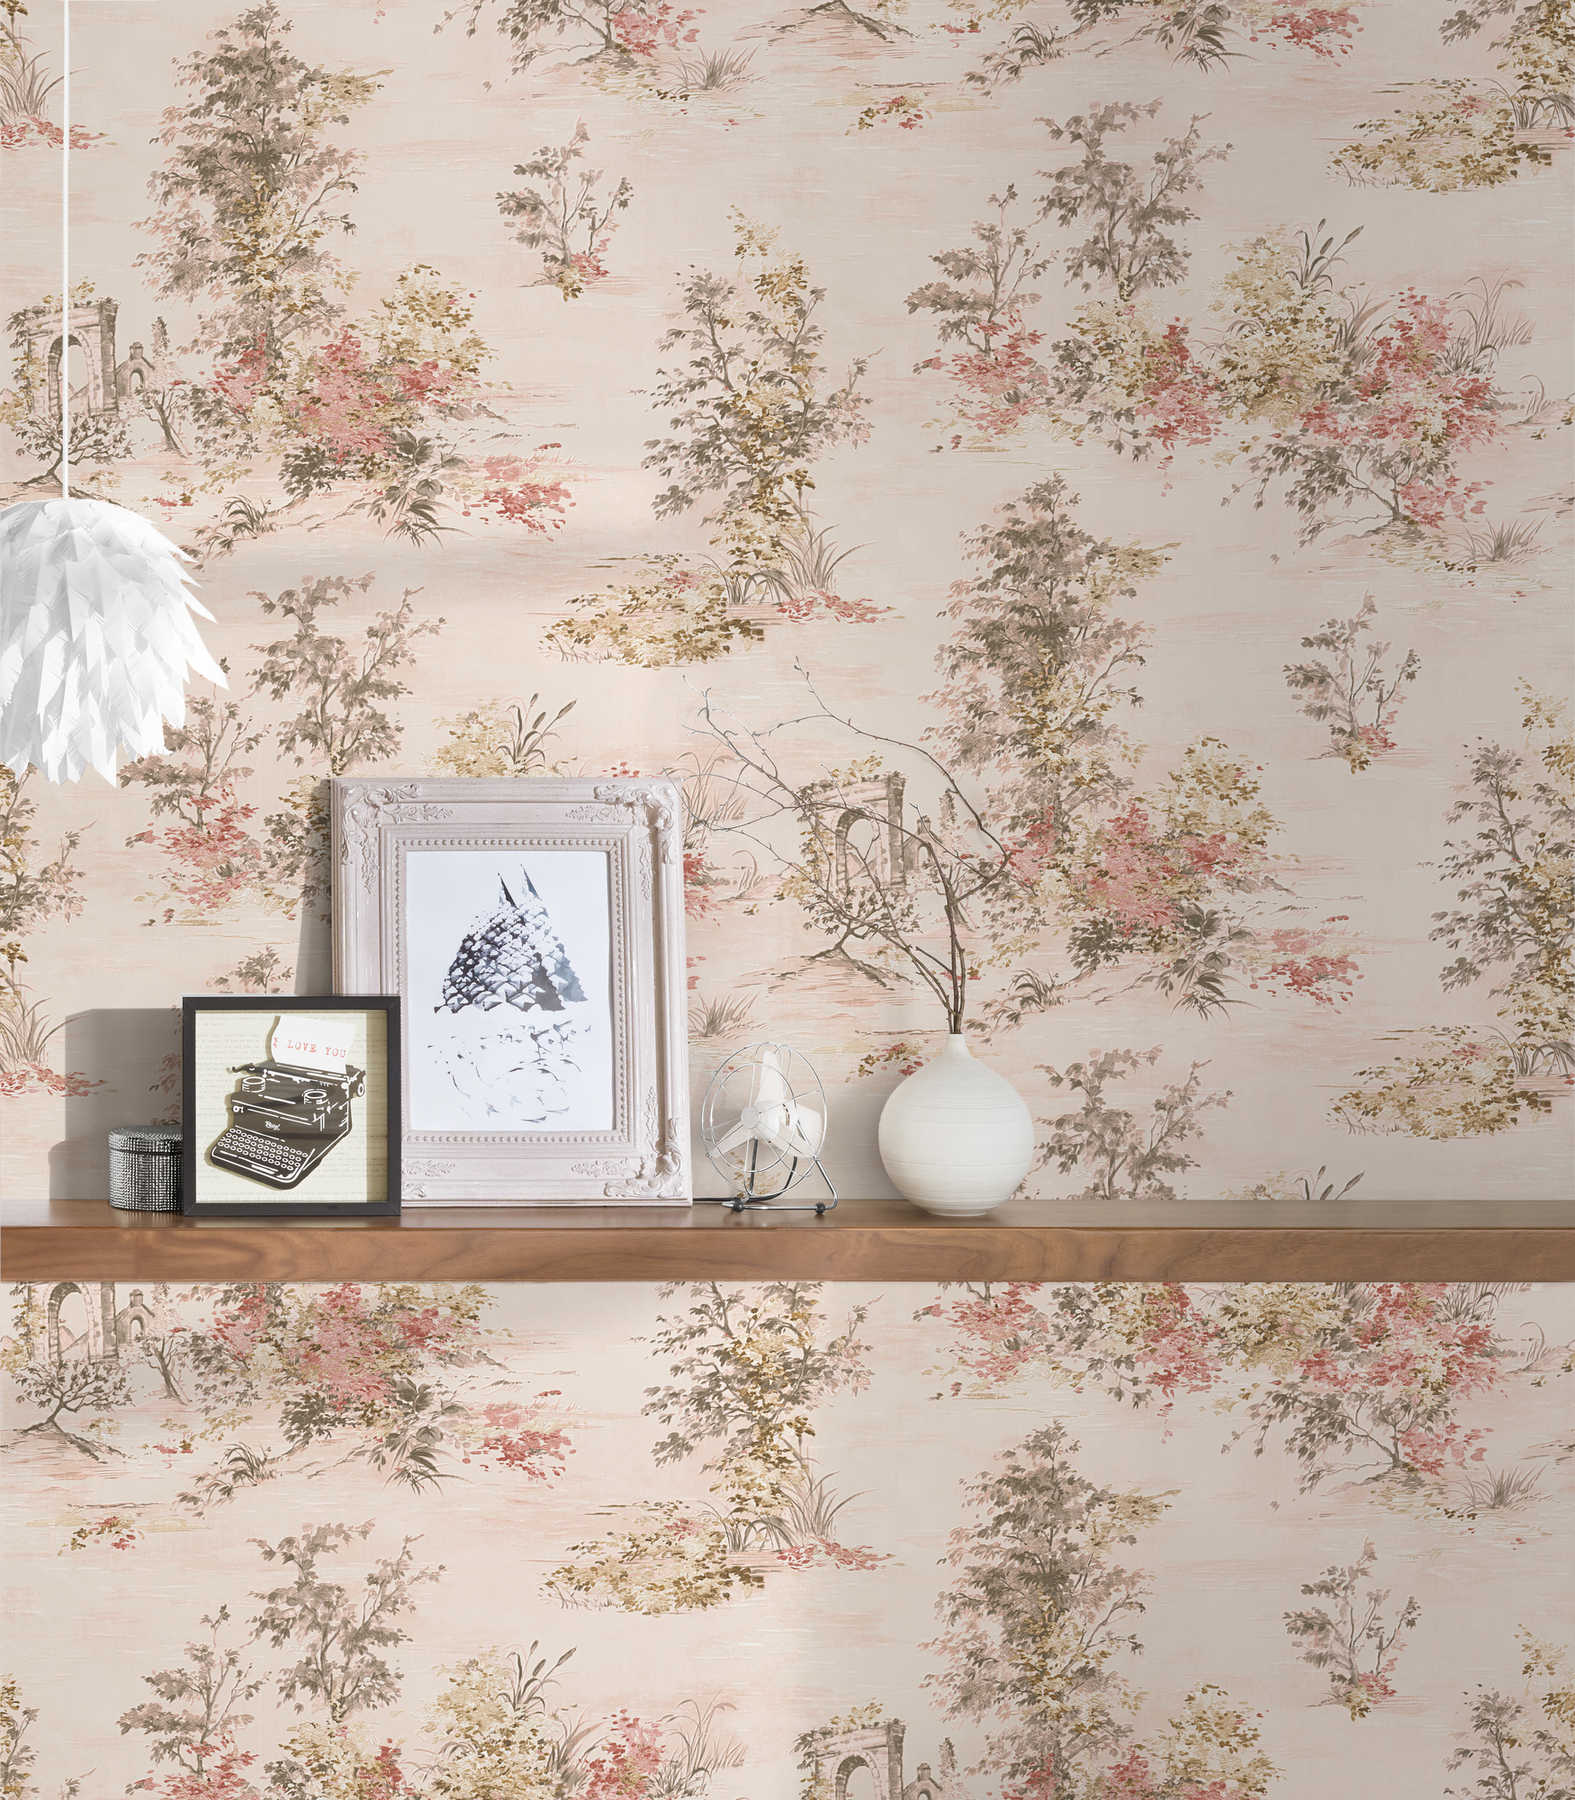             Wallpaper with landscape motif in classic style - red, pink, grey, cream
        